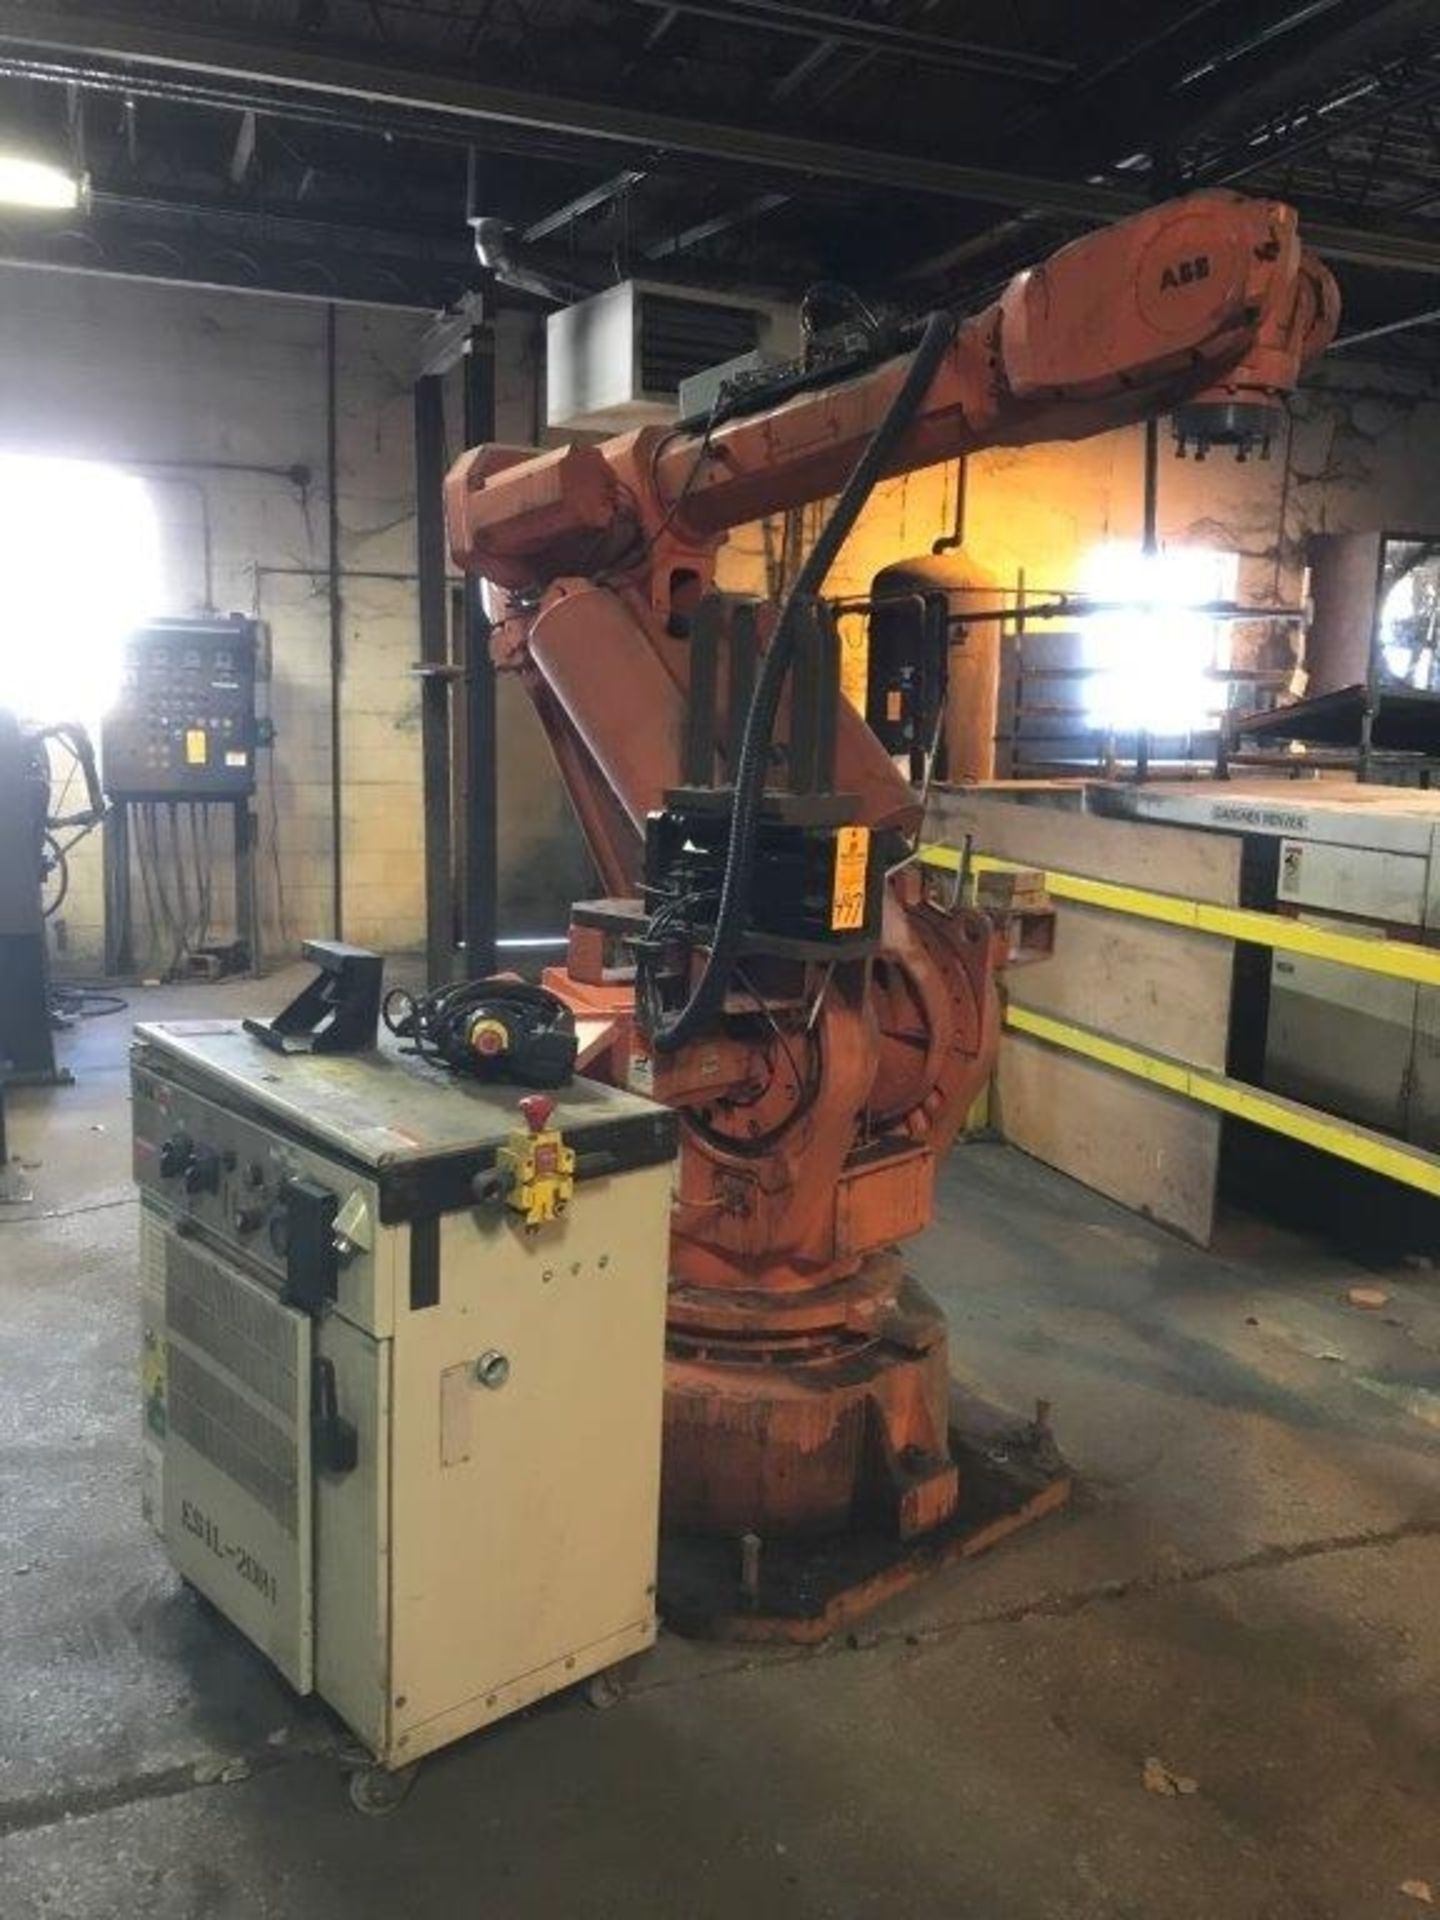 ABB 6 AXIS ROBOT IRB 6400 M97 CONTROL COUNCIL, 480 VOLT THREE PHASE WITH HAND HELD CONTROLER, S/N